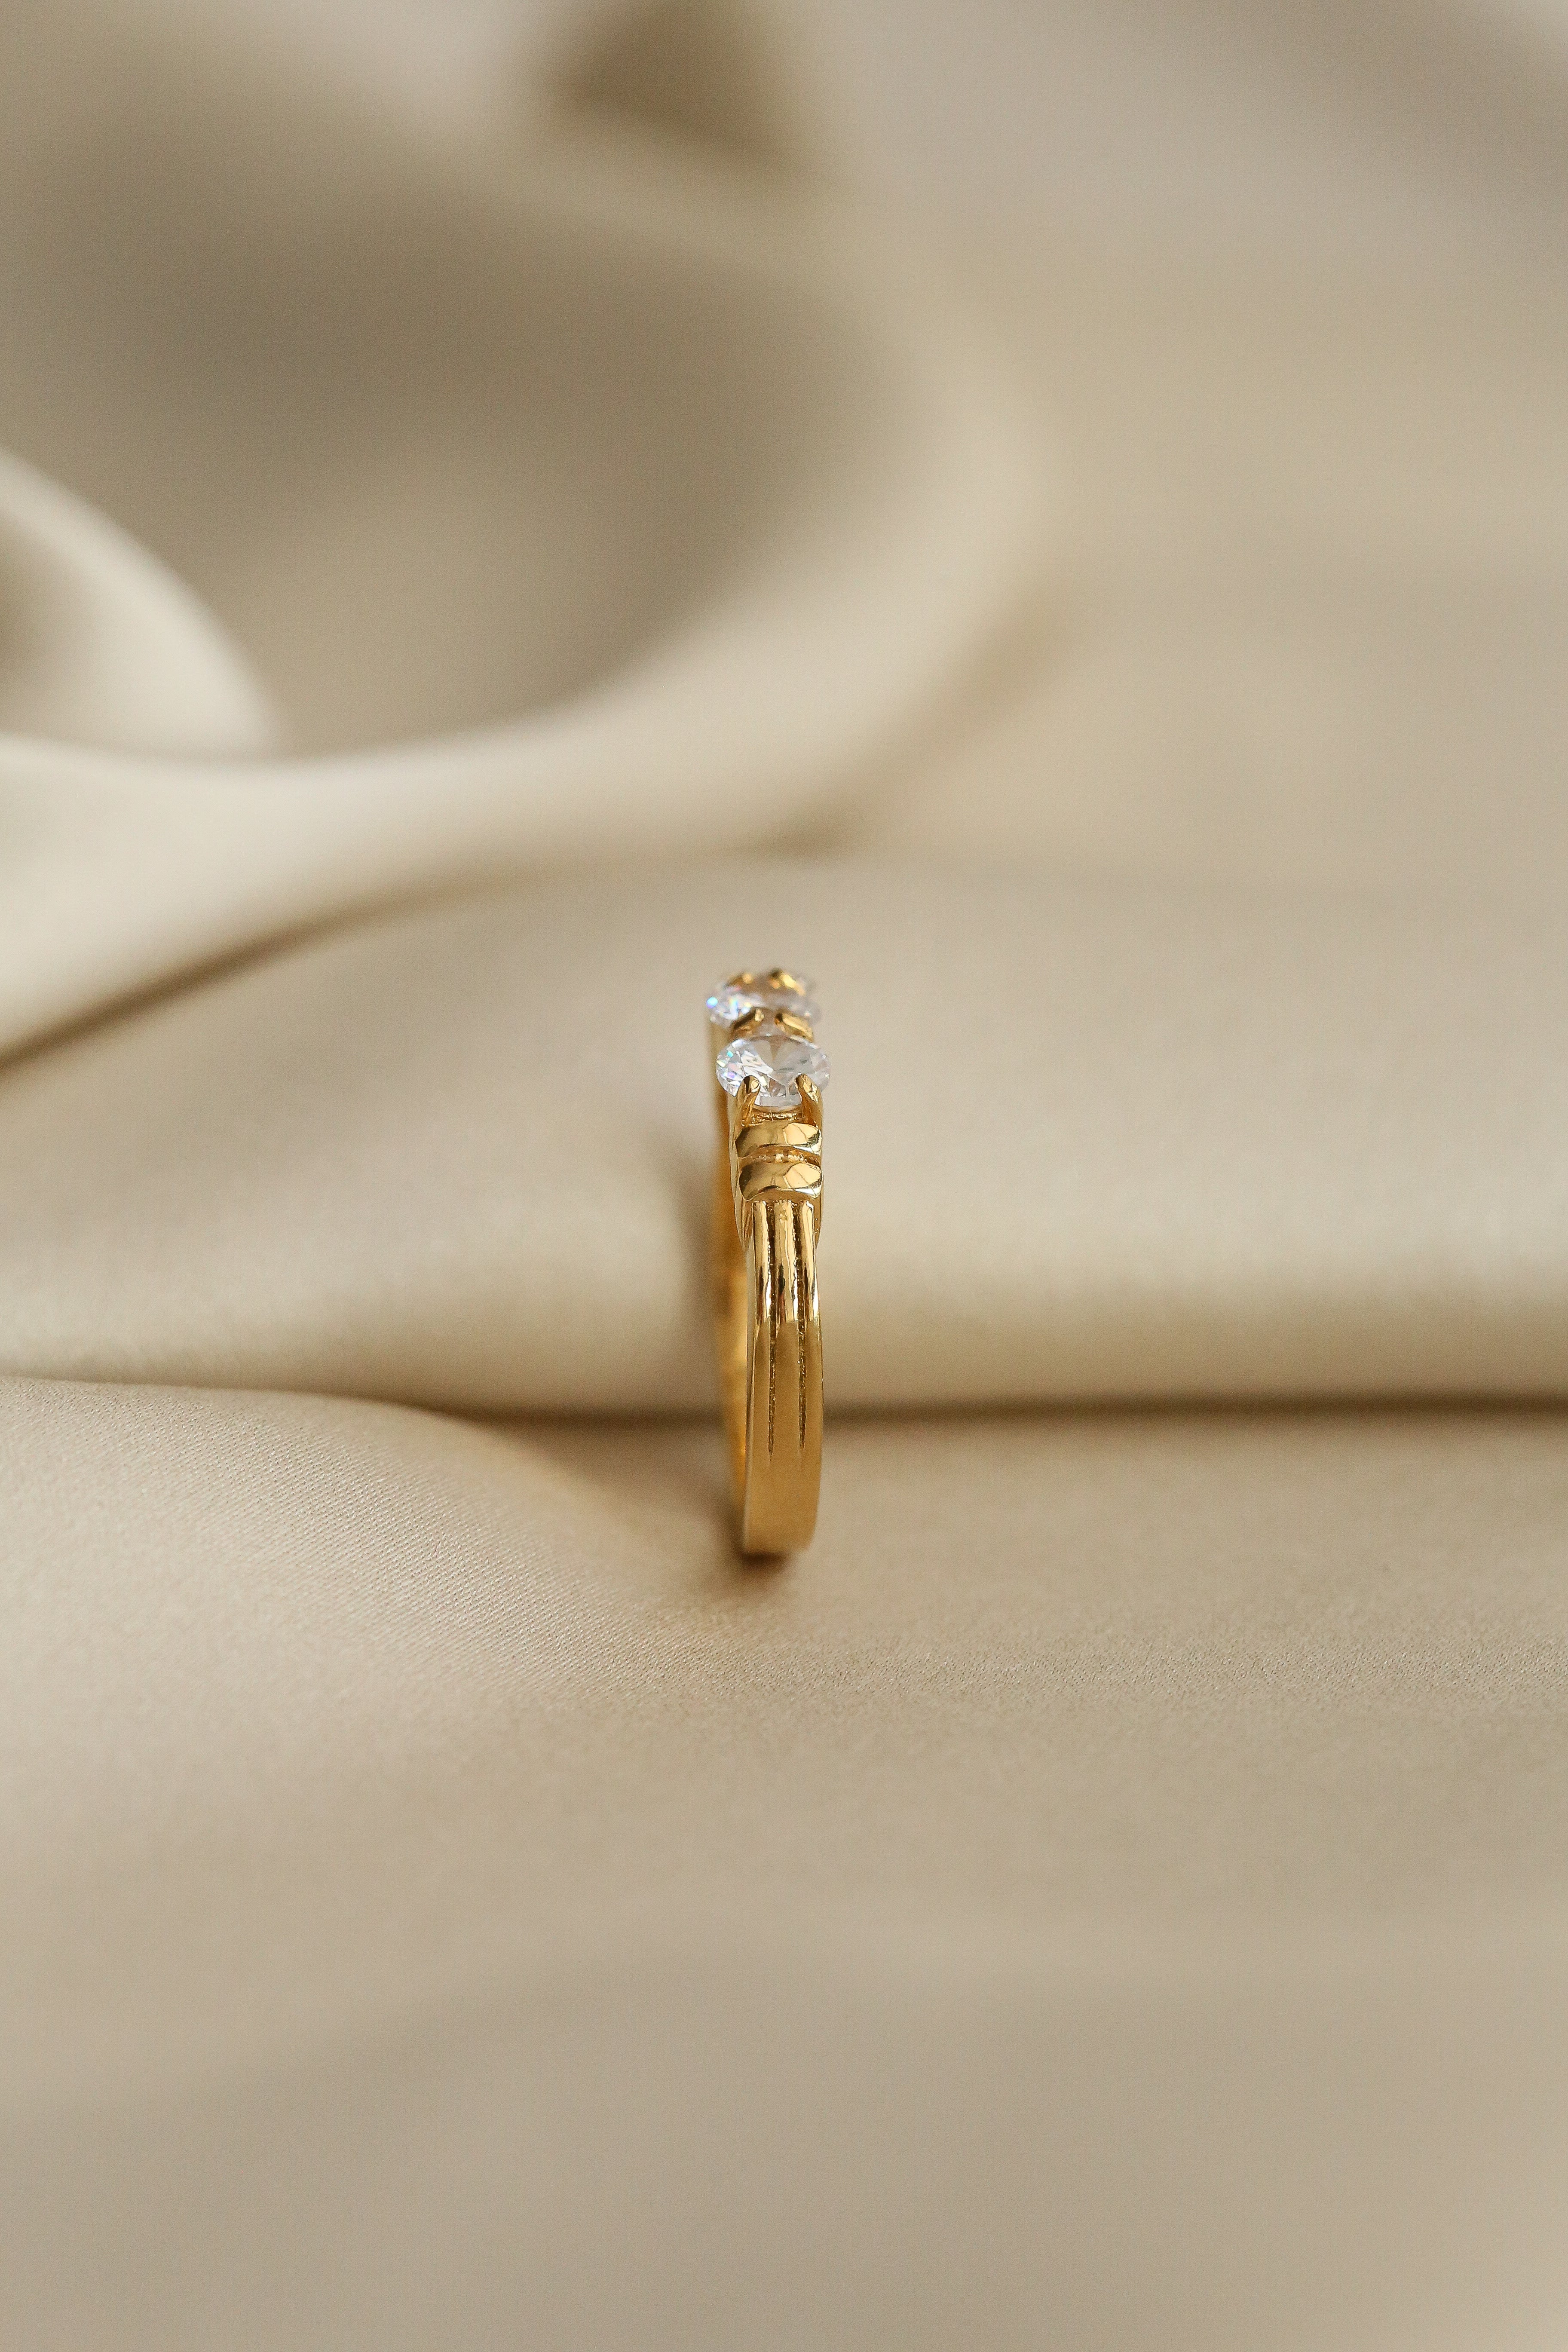 Jessica Ring - Boutique Minimaliste has waterproof, durable, elegant and vintage inspired jewelry